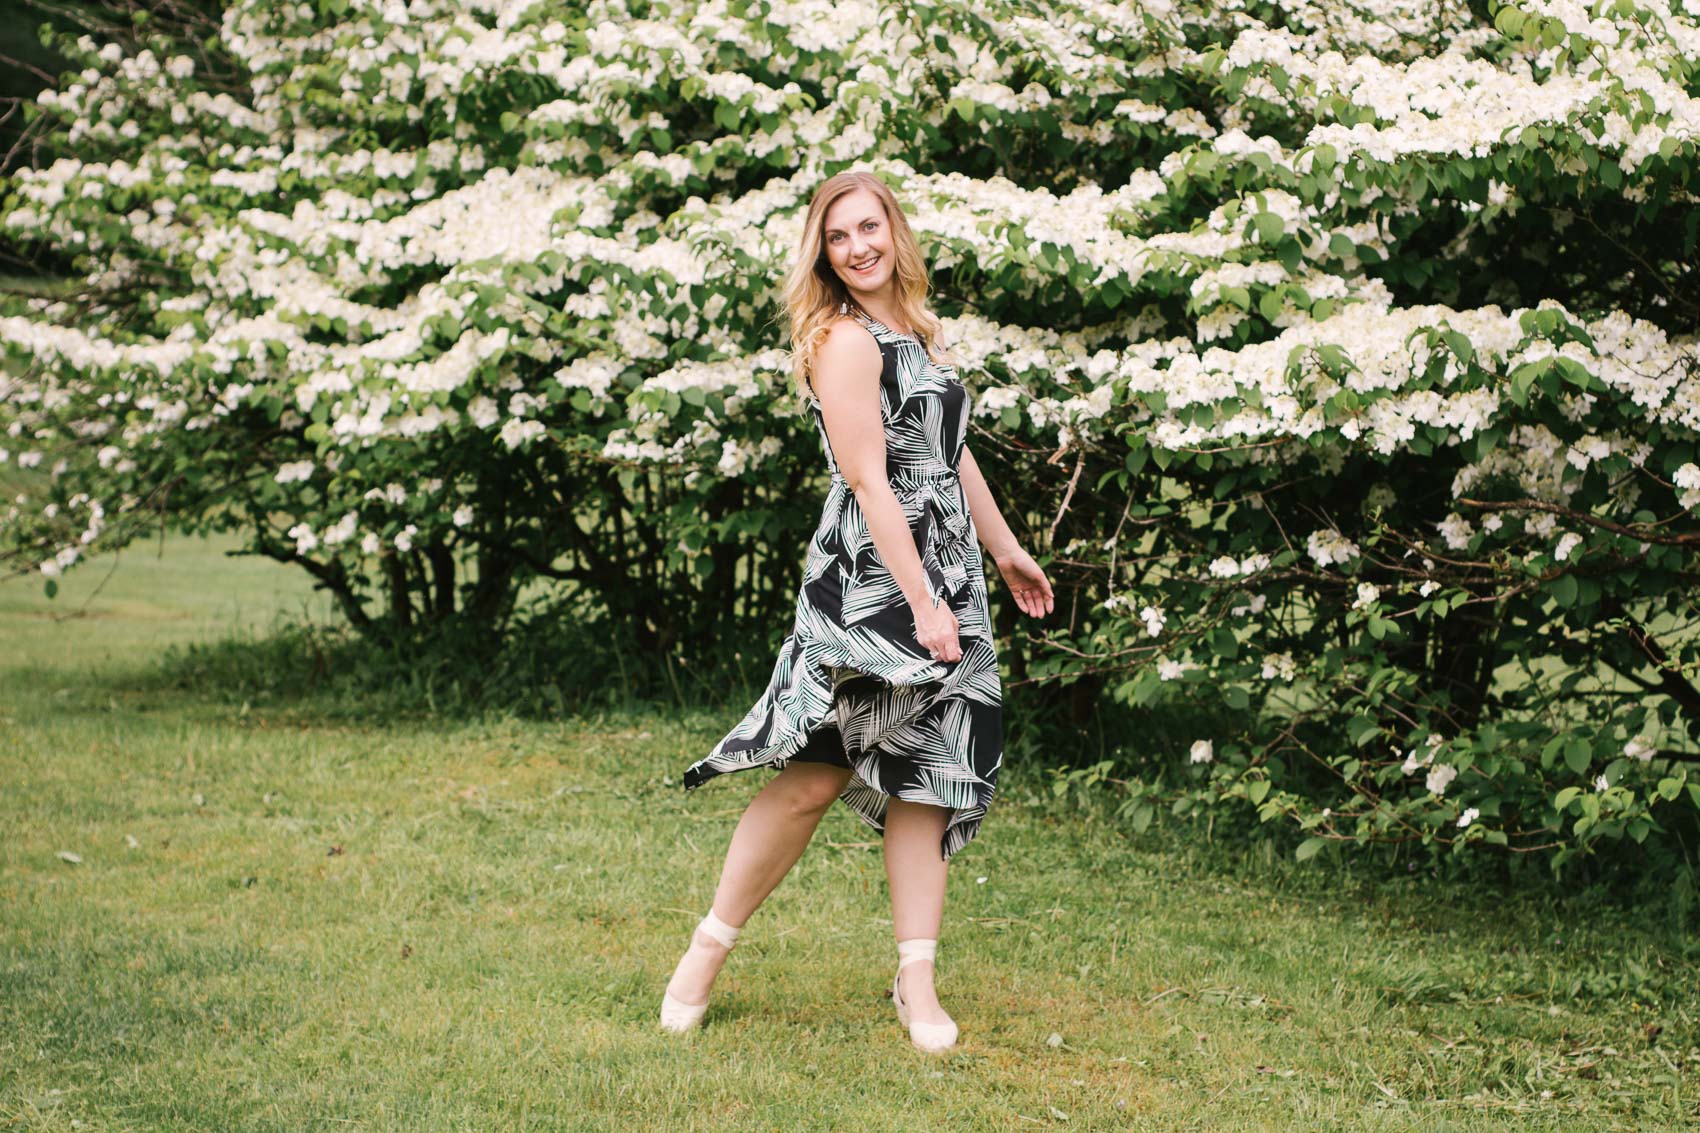 Allyn Lewis of The Gem shares a casual summer outfit in a classy black and white palm print dress. 